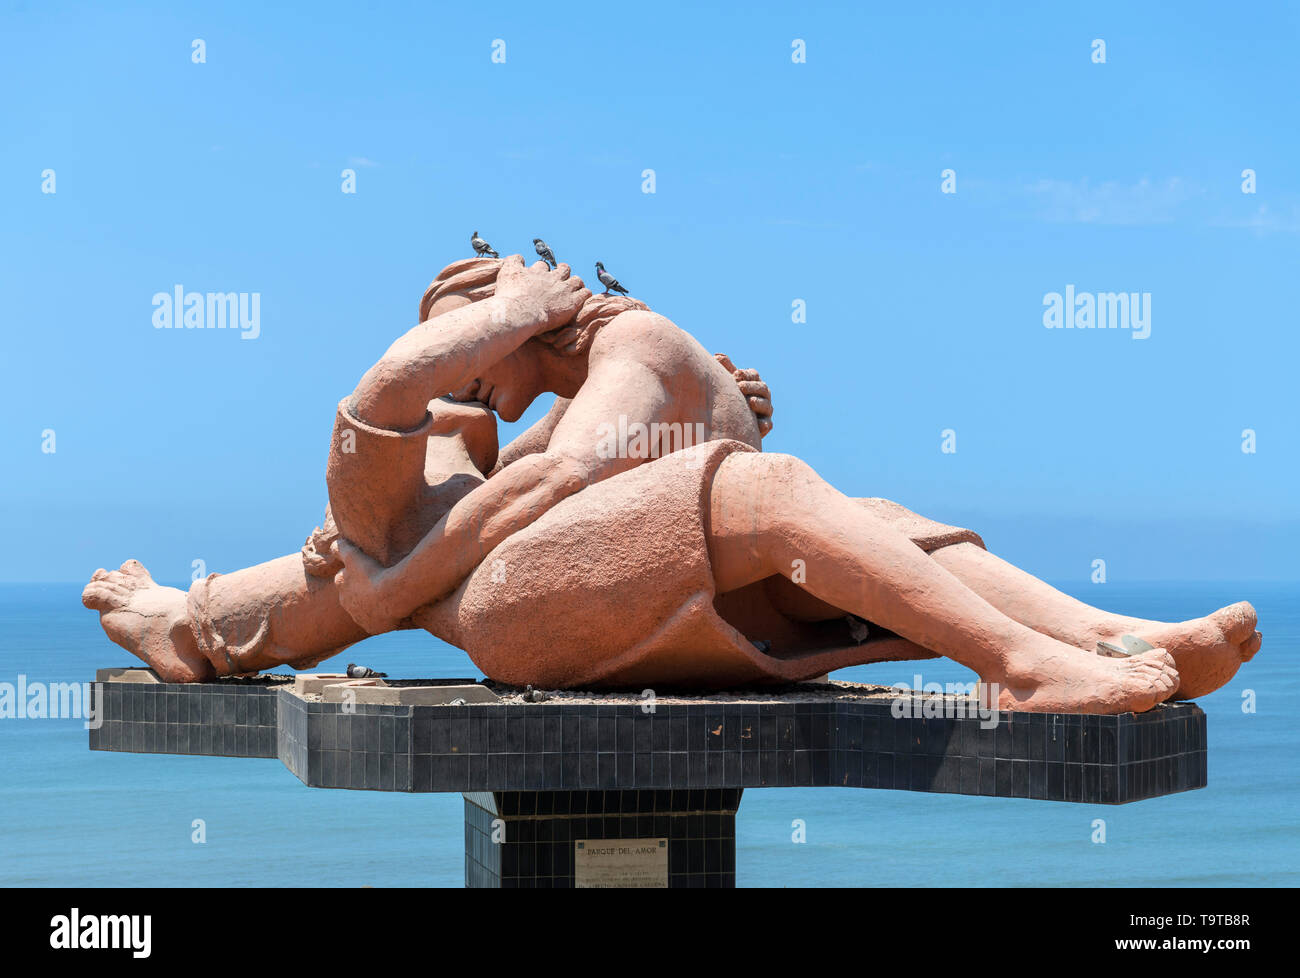 El Beso (The Kiss) by sculptor Victor Delfín on the clifftops overlooking the Pacific Ocean, Parque del Amor, Miraflores, Lima, Peru, South America Stock Photo